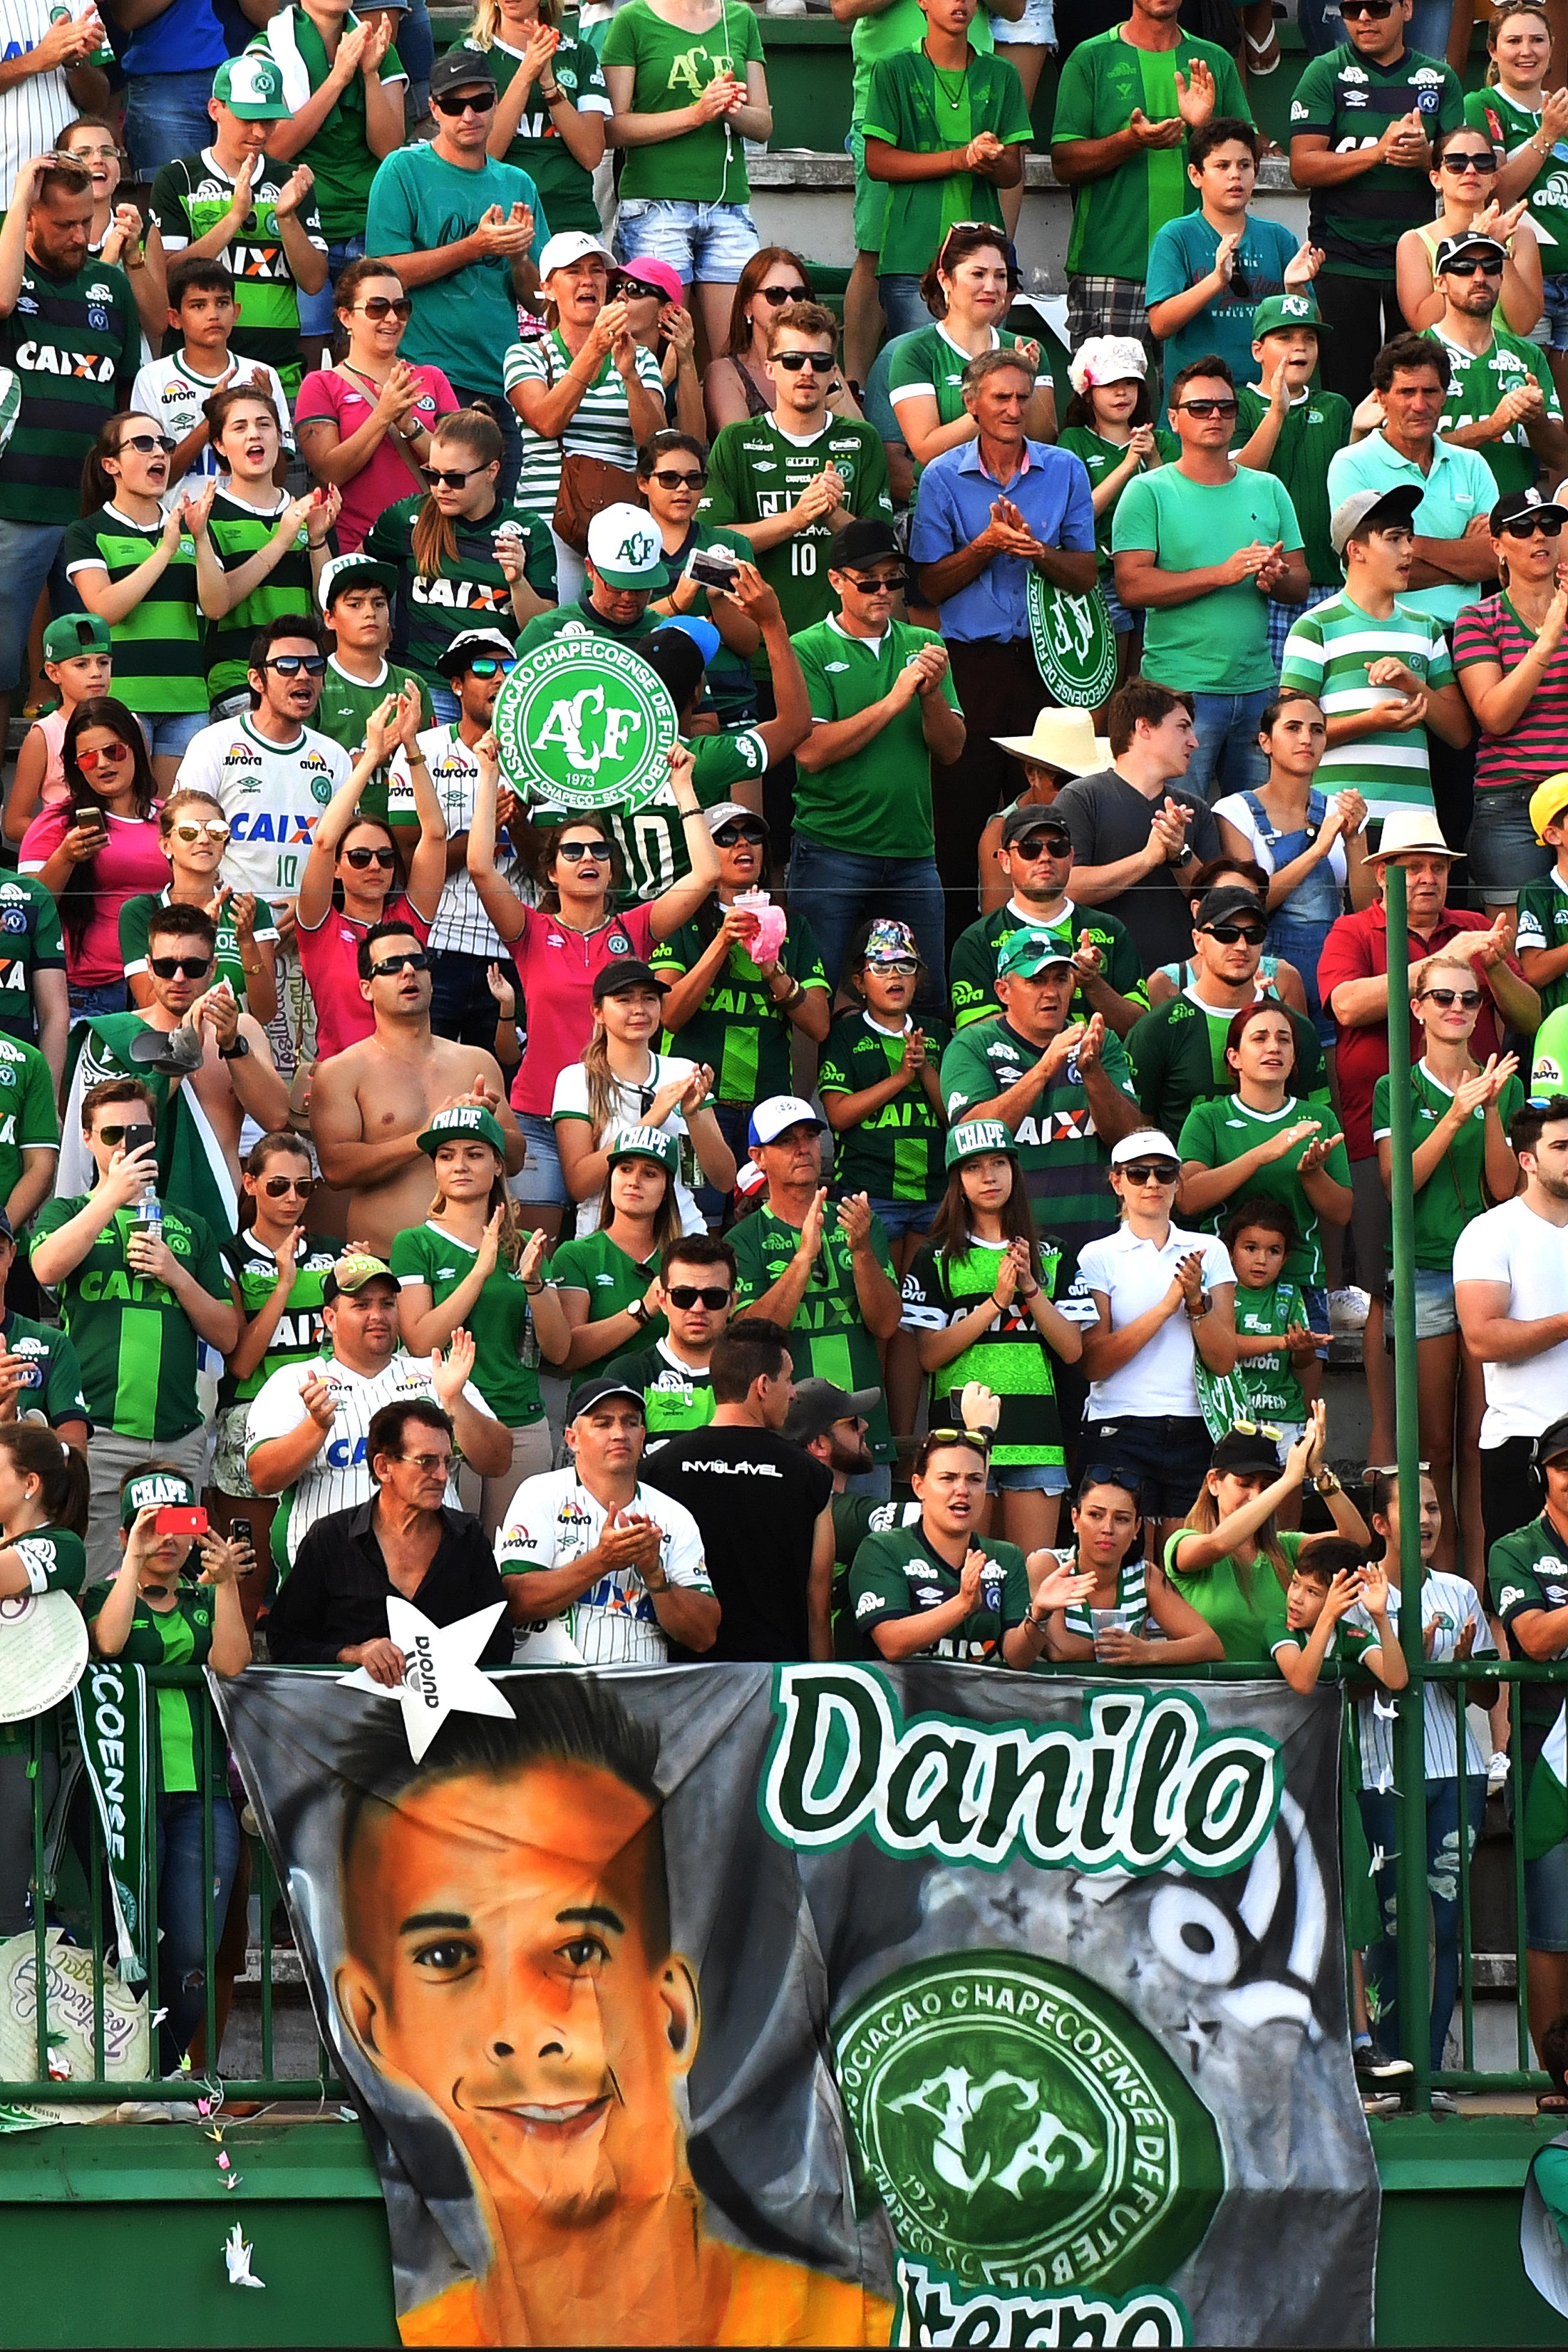 Chapecoense's supporters cheer during a friendly football match against Palmeiras -Brazilian Champion 2016- at the Arena Conda stadium in Chapeco, Santa Catarina state, in southern Brazil on January 21, 2017.  Most of the members of the Chapocoense football team perished in a November 28, 2016 plane crash in Colombia. / AFP PHOTO / NELSON ALMEIDA